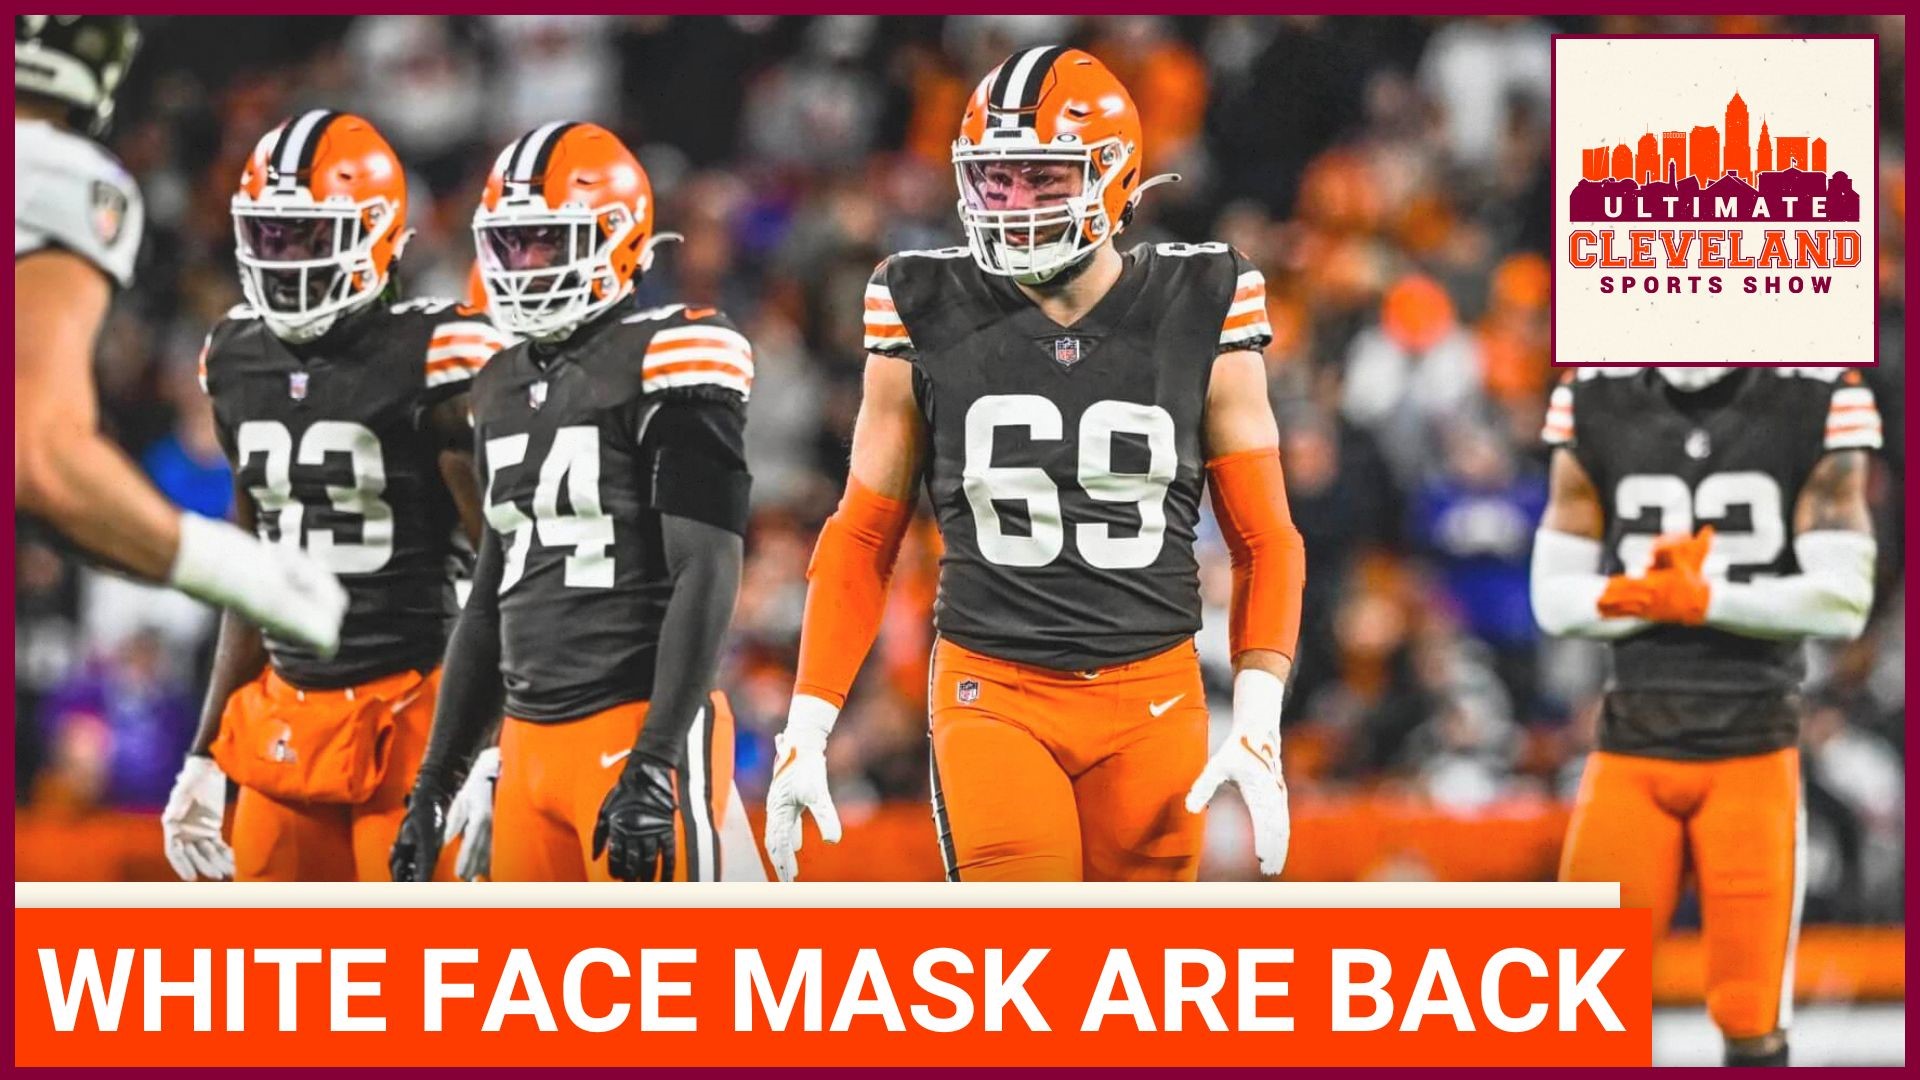 The Cleveland Browns announce tweak to their uniforms